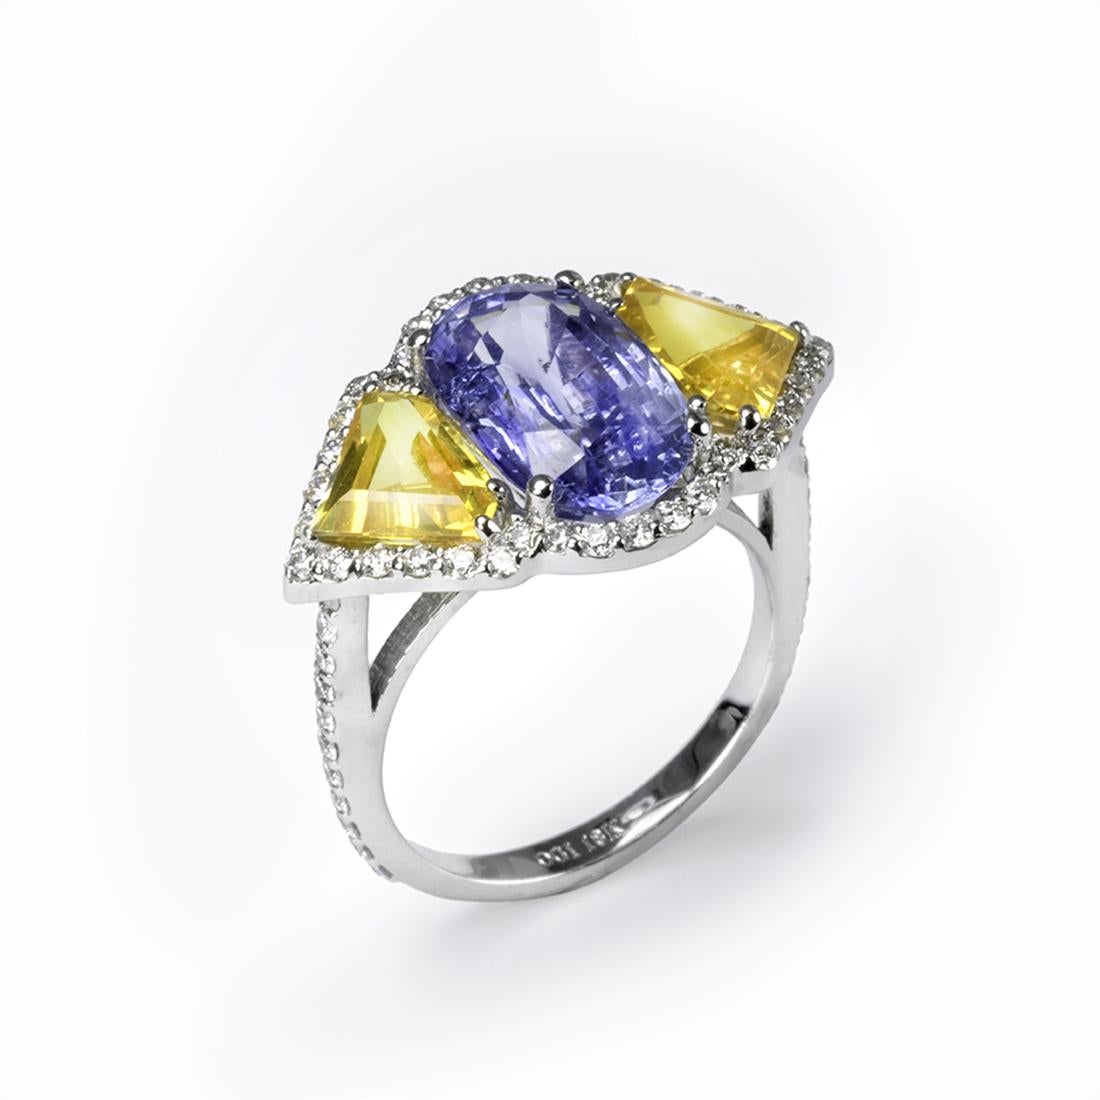 Cushion Cut Ceylon Blue and Yellow Sapphire Diamond Gold Cocktail Ring Weighing 8.26 Carat